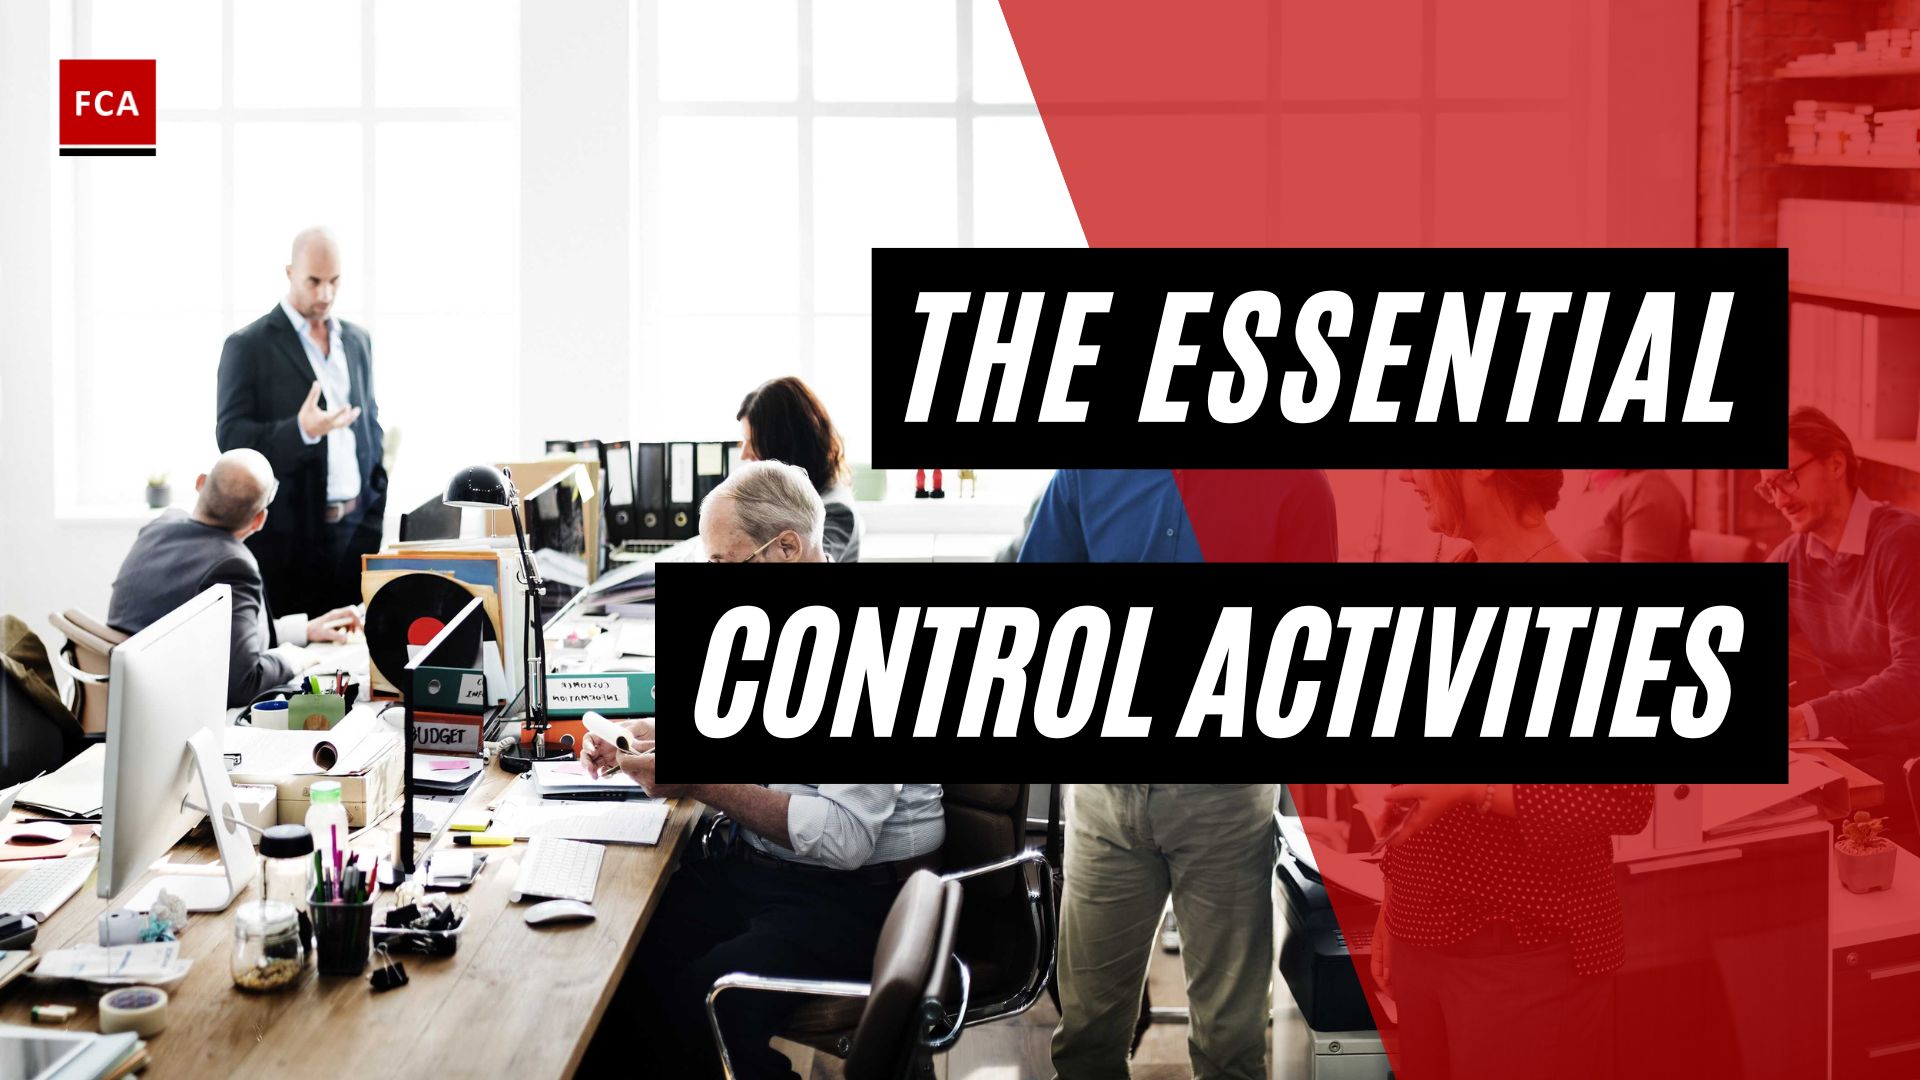 The Essential Control Activities